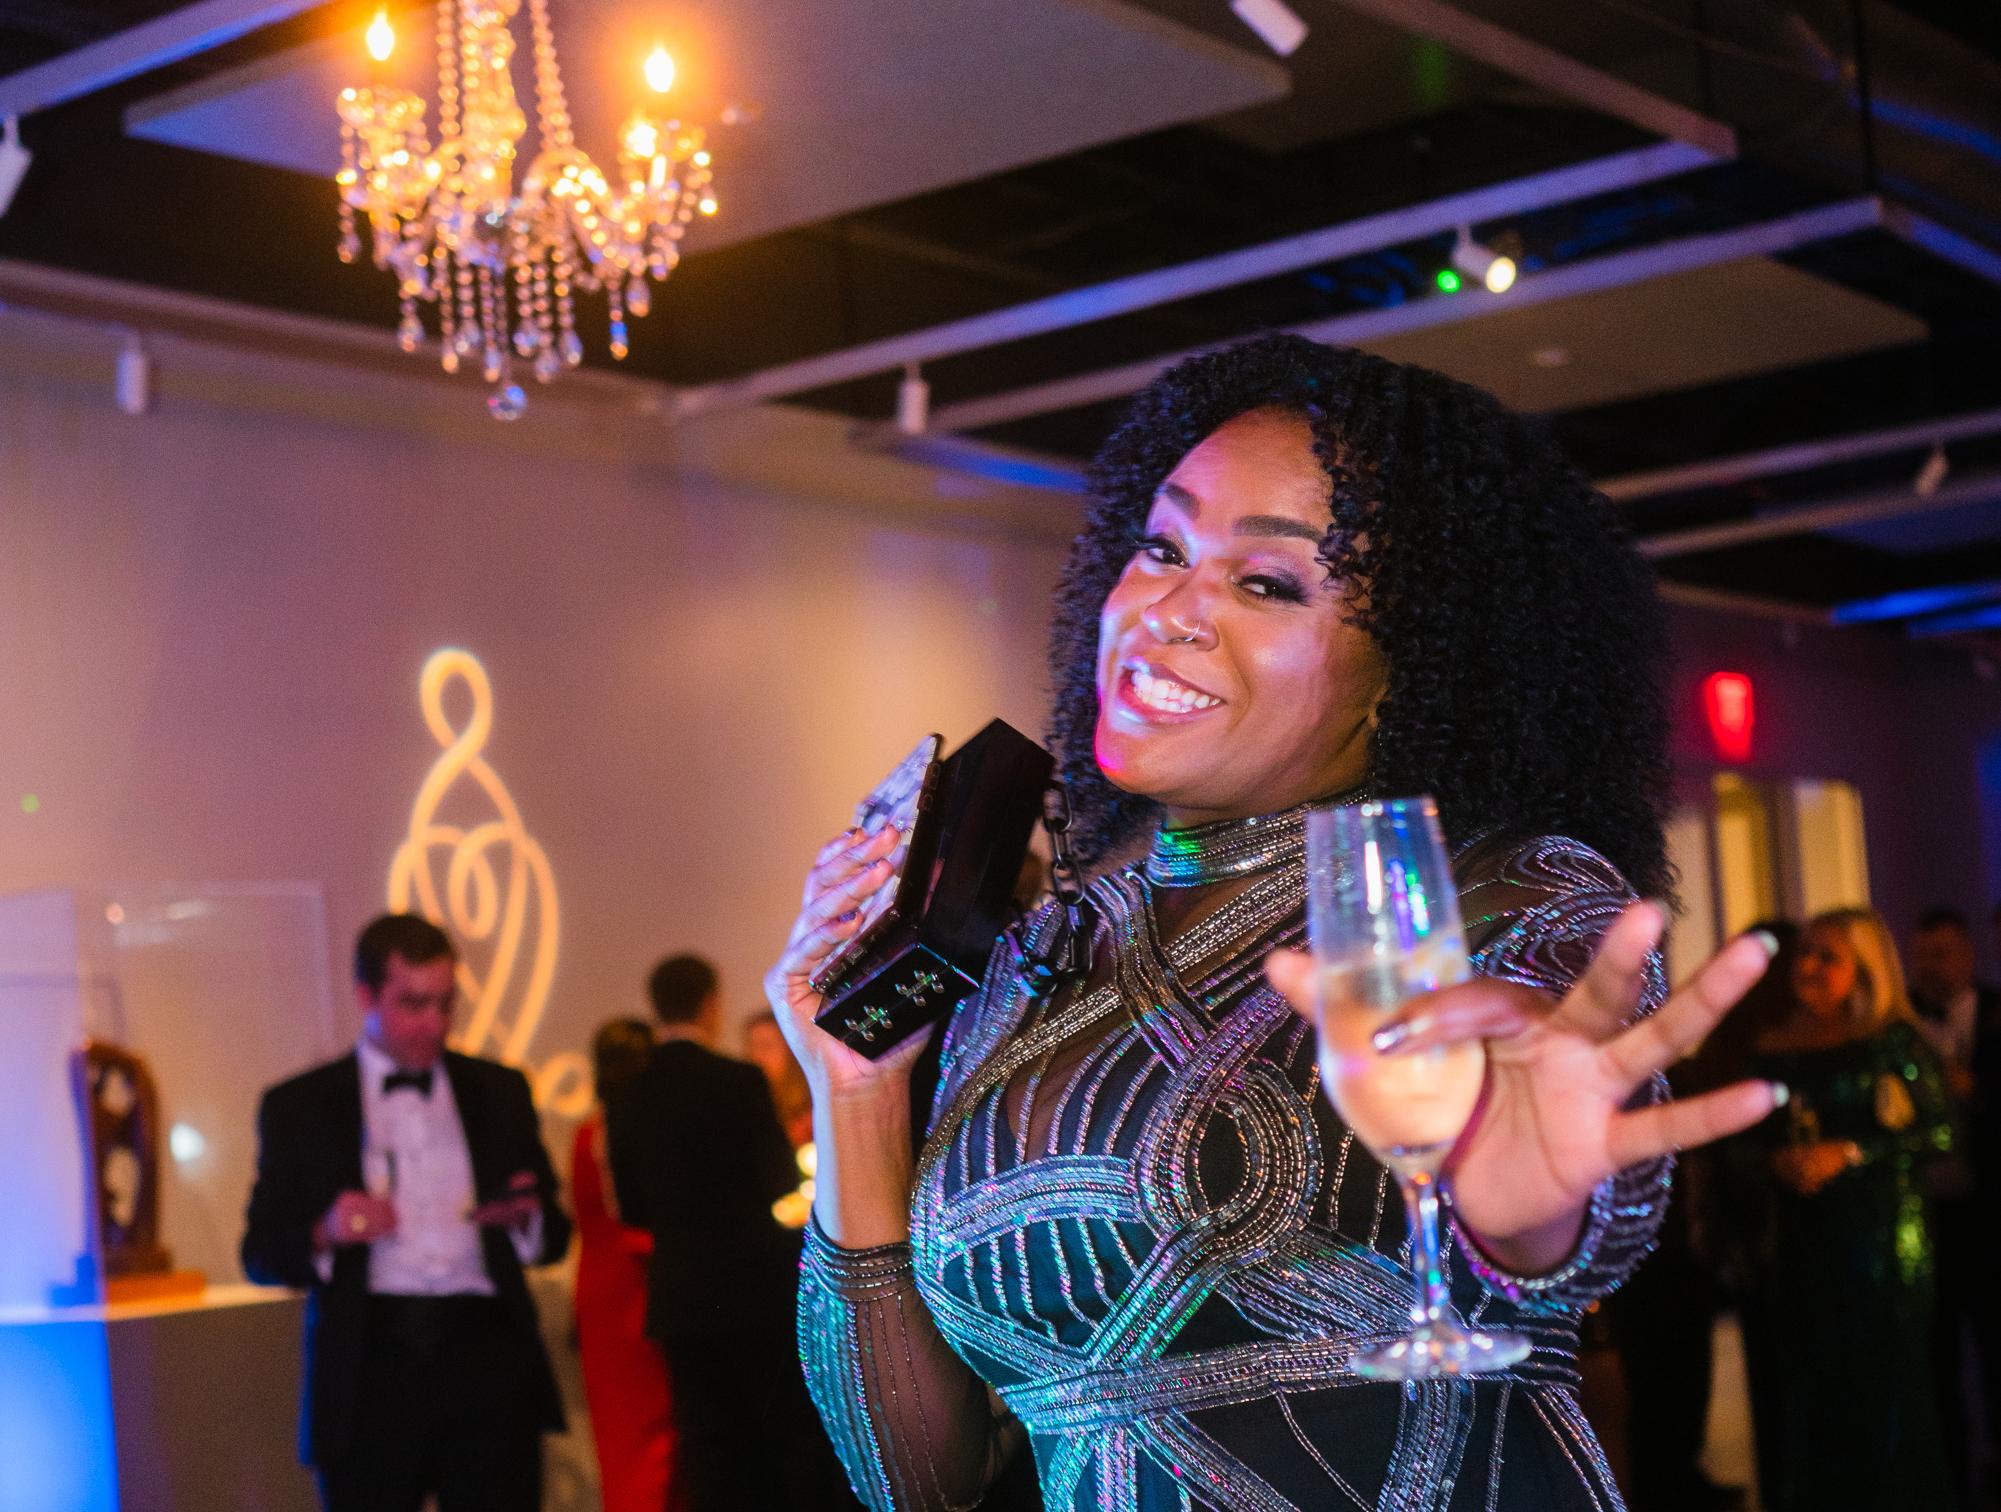 Image of woman at last year's gala in a sparkly dress smiling and gesturing to camera with a glass of champagne